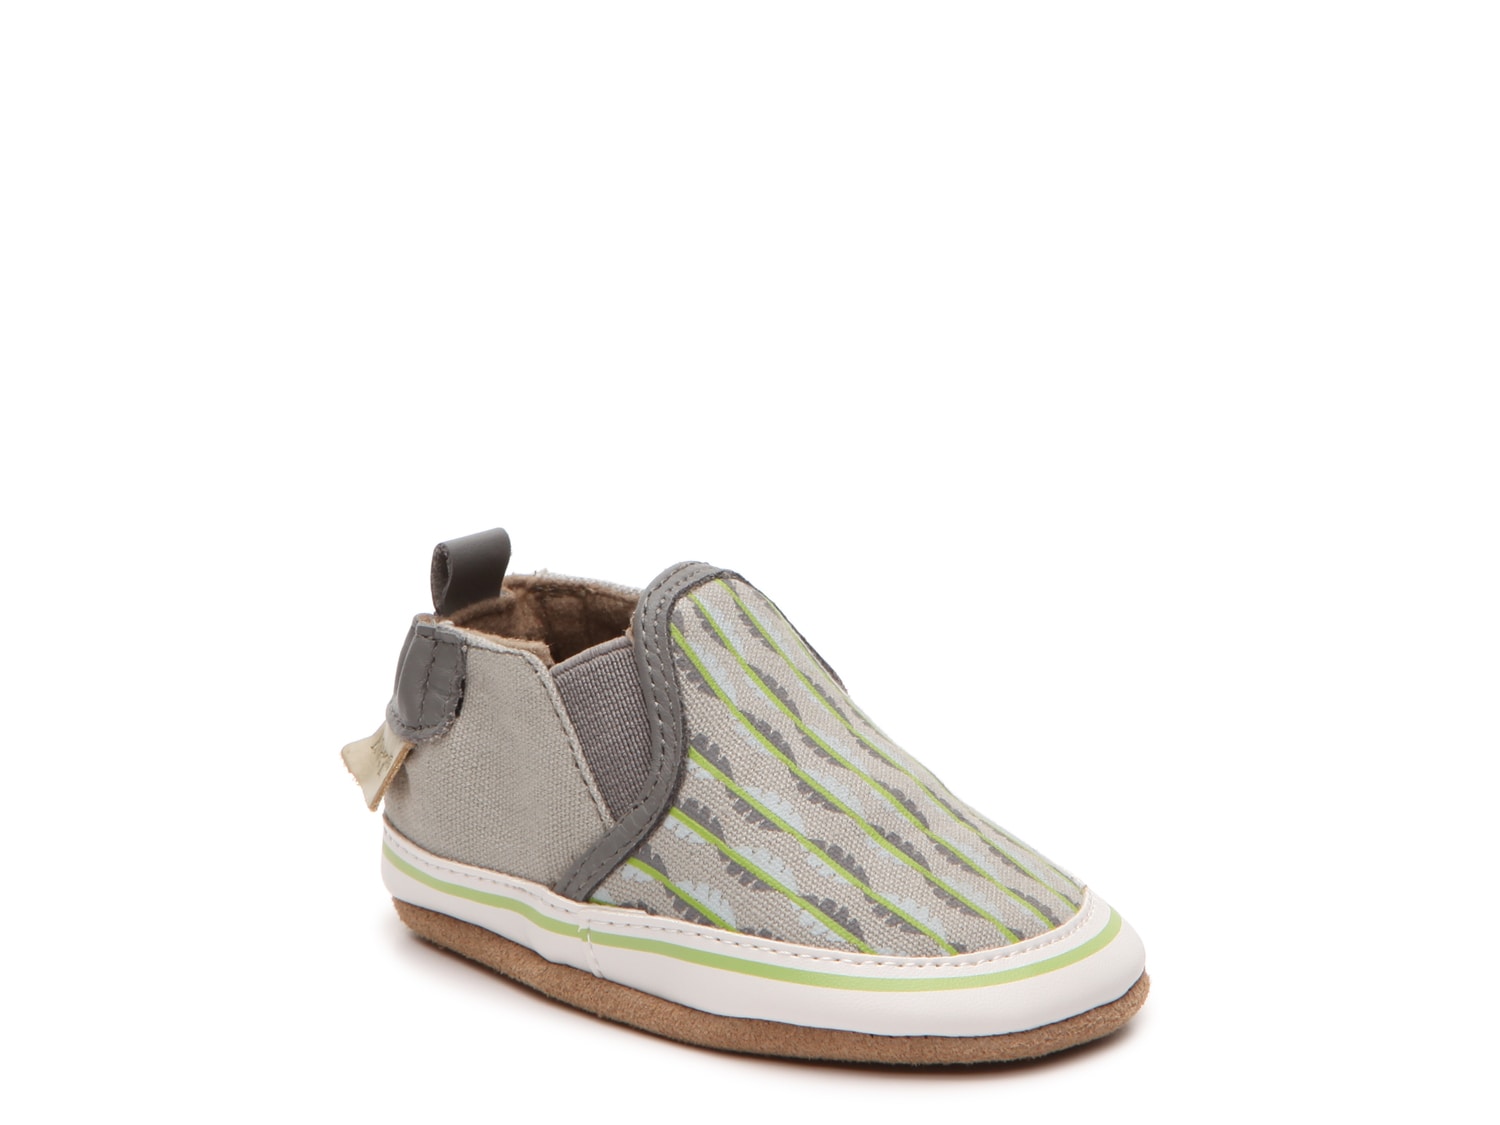 dsw baby girl shoes